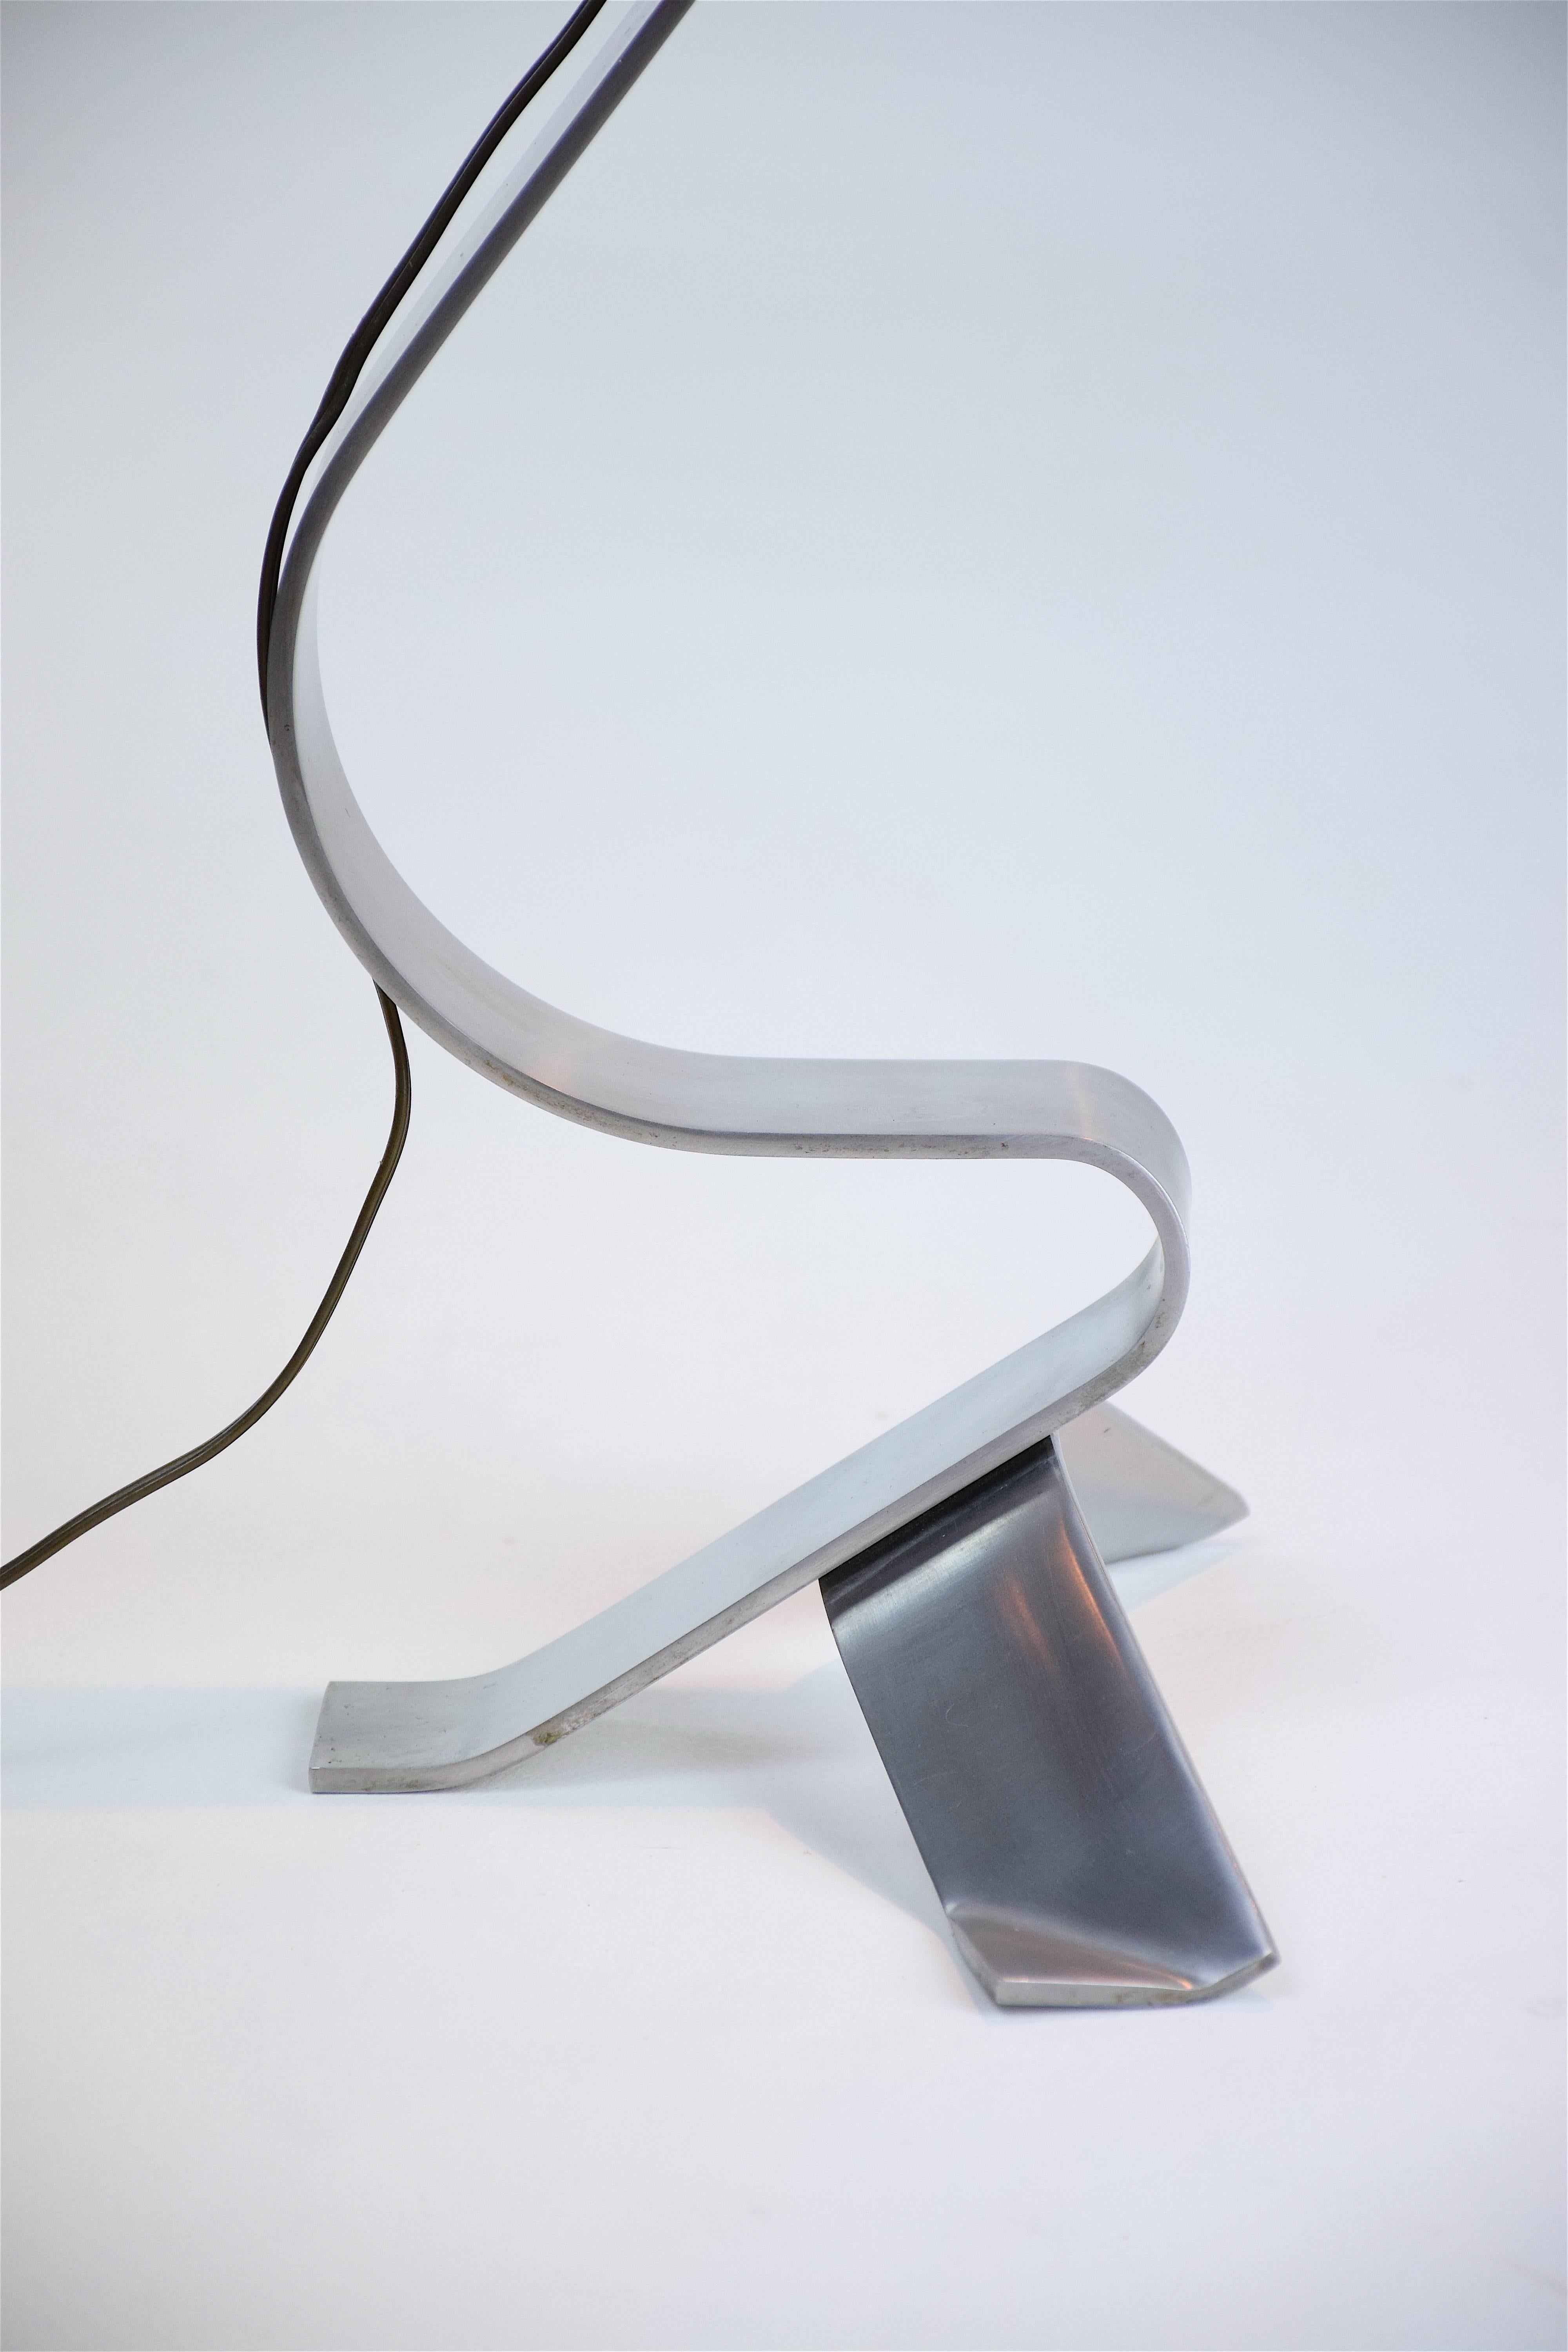 Stainless Steel French Bird Shaped Steel Lamp, 1970s-1980s